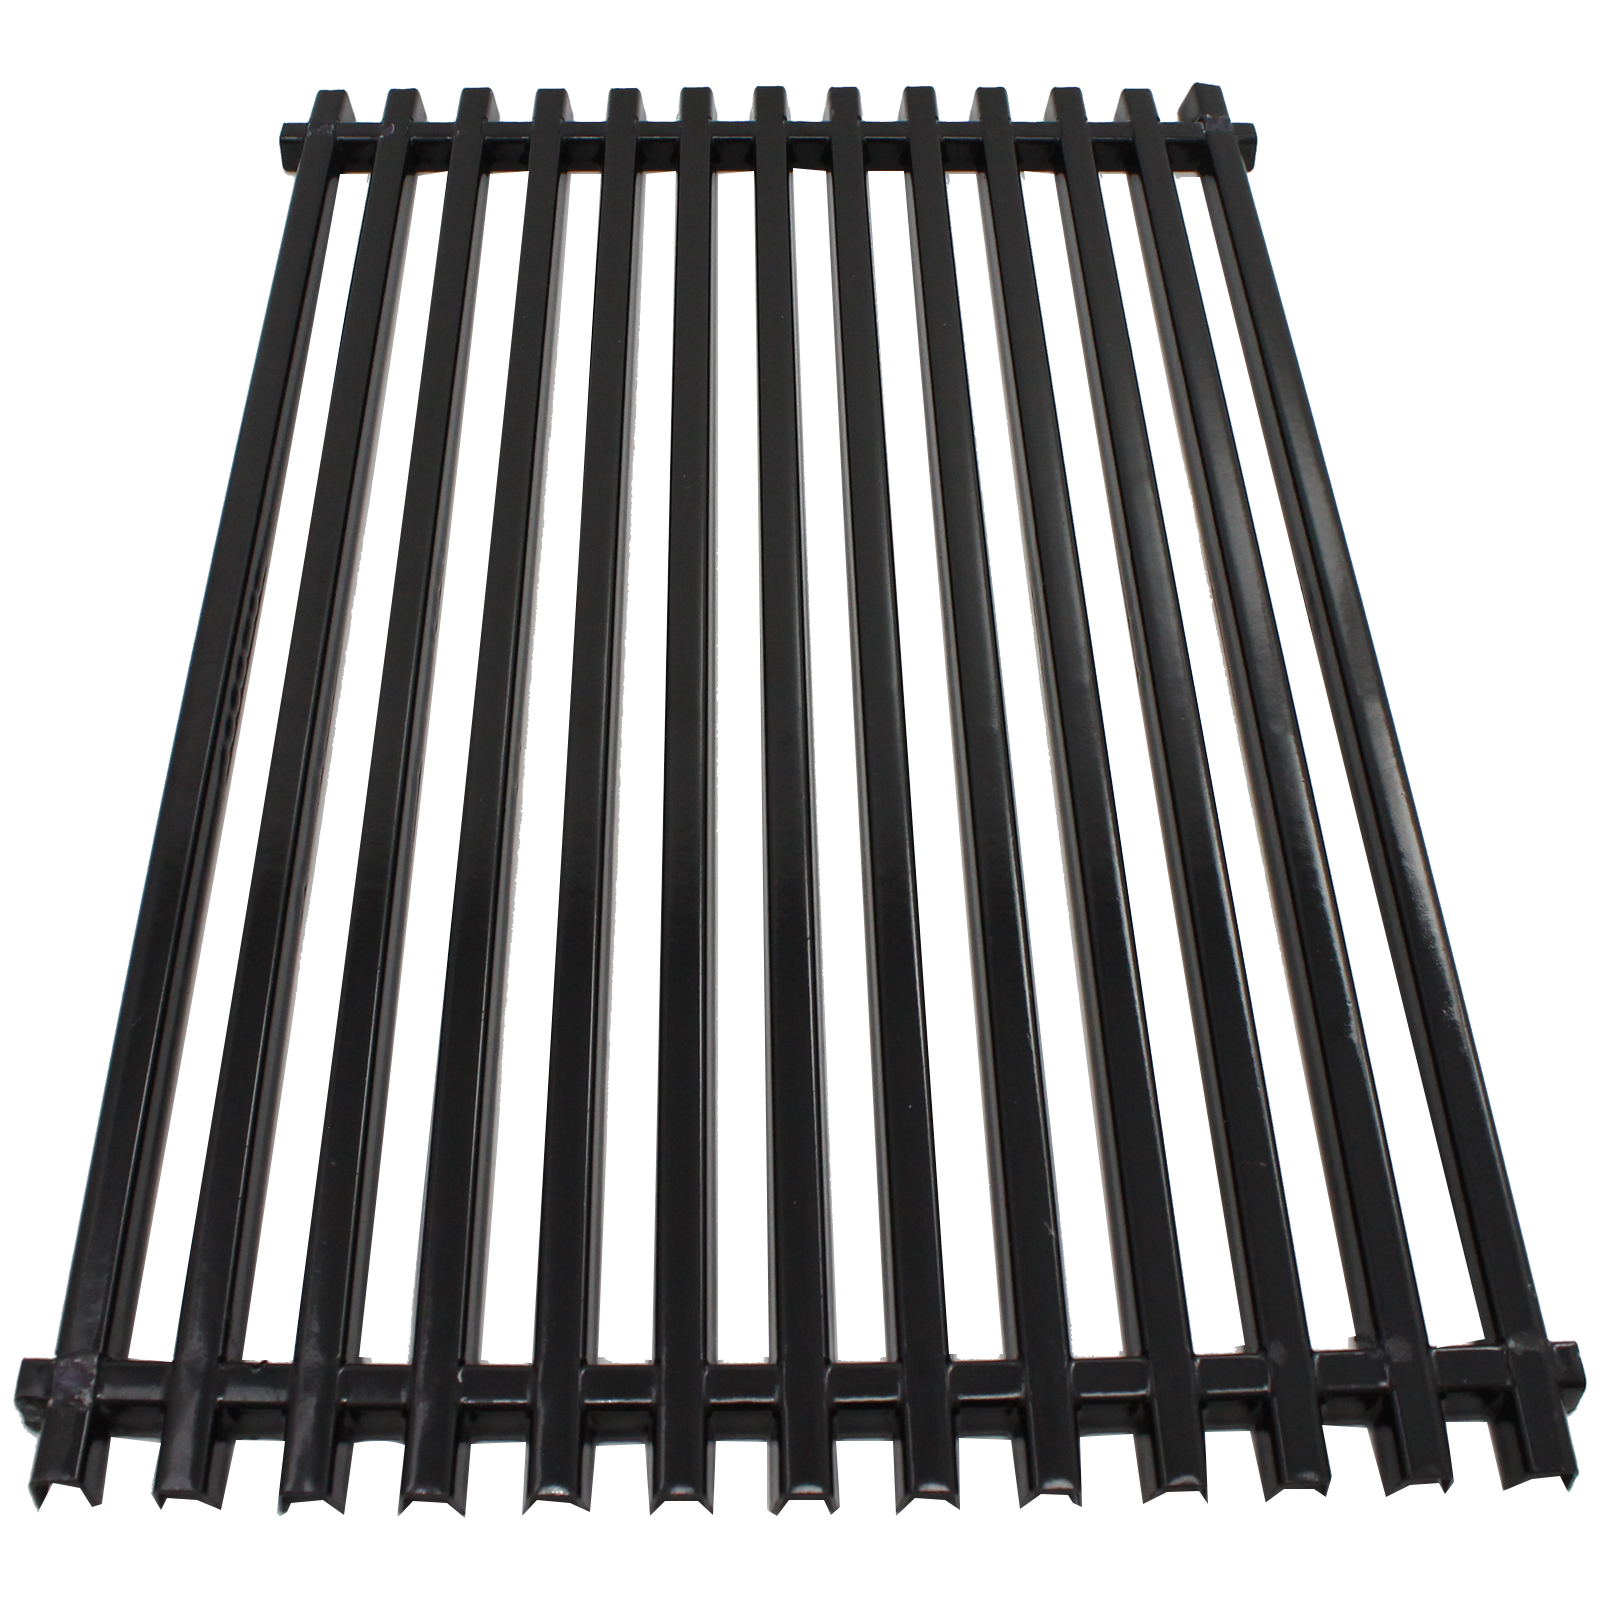 BBQ Grill Cooking Grates Replacement Parts for Weber Spirit E 310, Weber Genesis Silver B, Weber Genesis 1000, Weber Genesis Silver C - Compatible Barbeque Porcelain Coated Steel Grid 17 3/4" - image 3 of 4